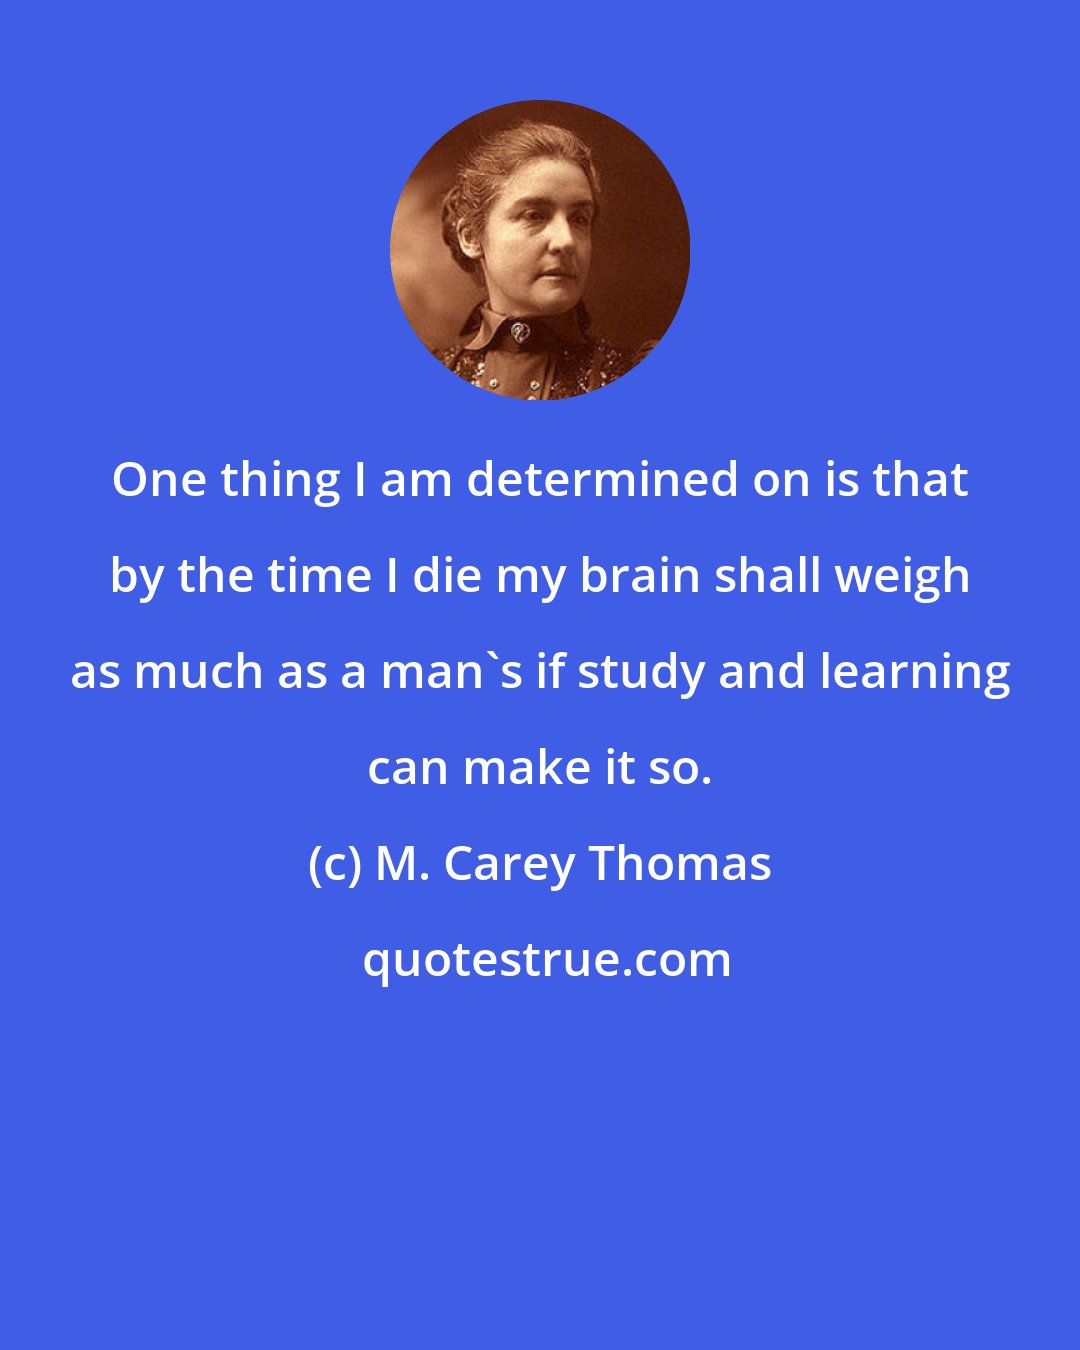 M. Carey Thomas: One thing I am determined on is that by the time I die my brain shall weigh as much as a man's if study and learning can make it so.